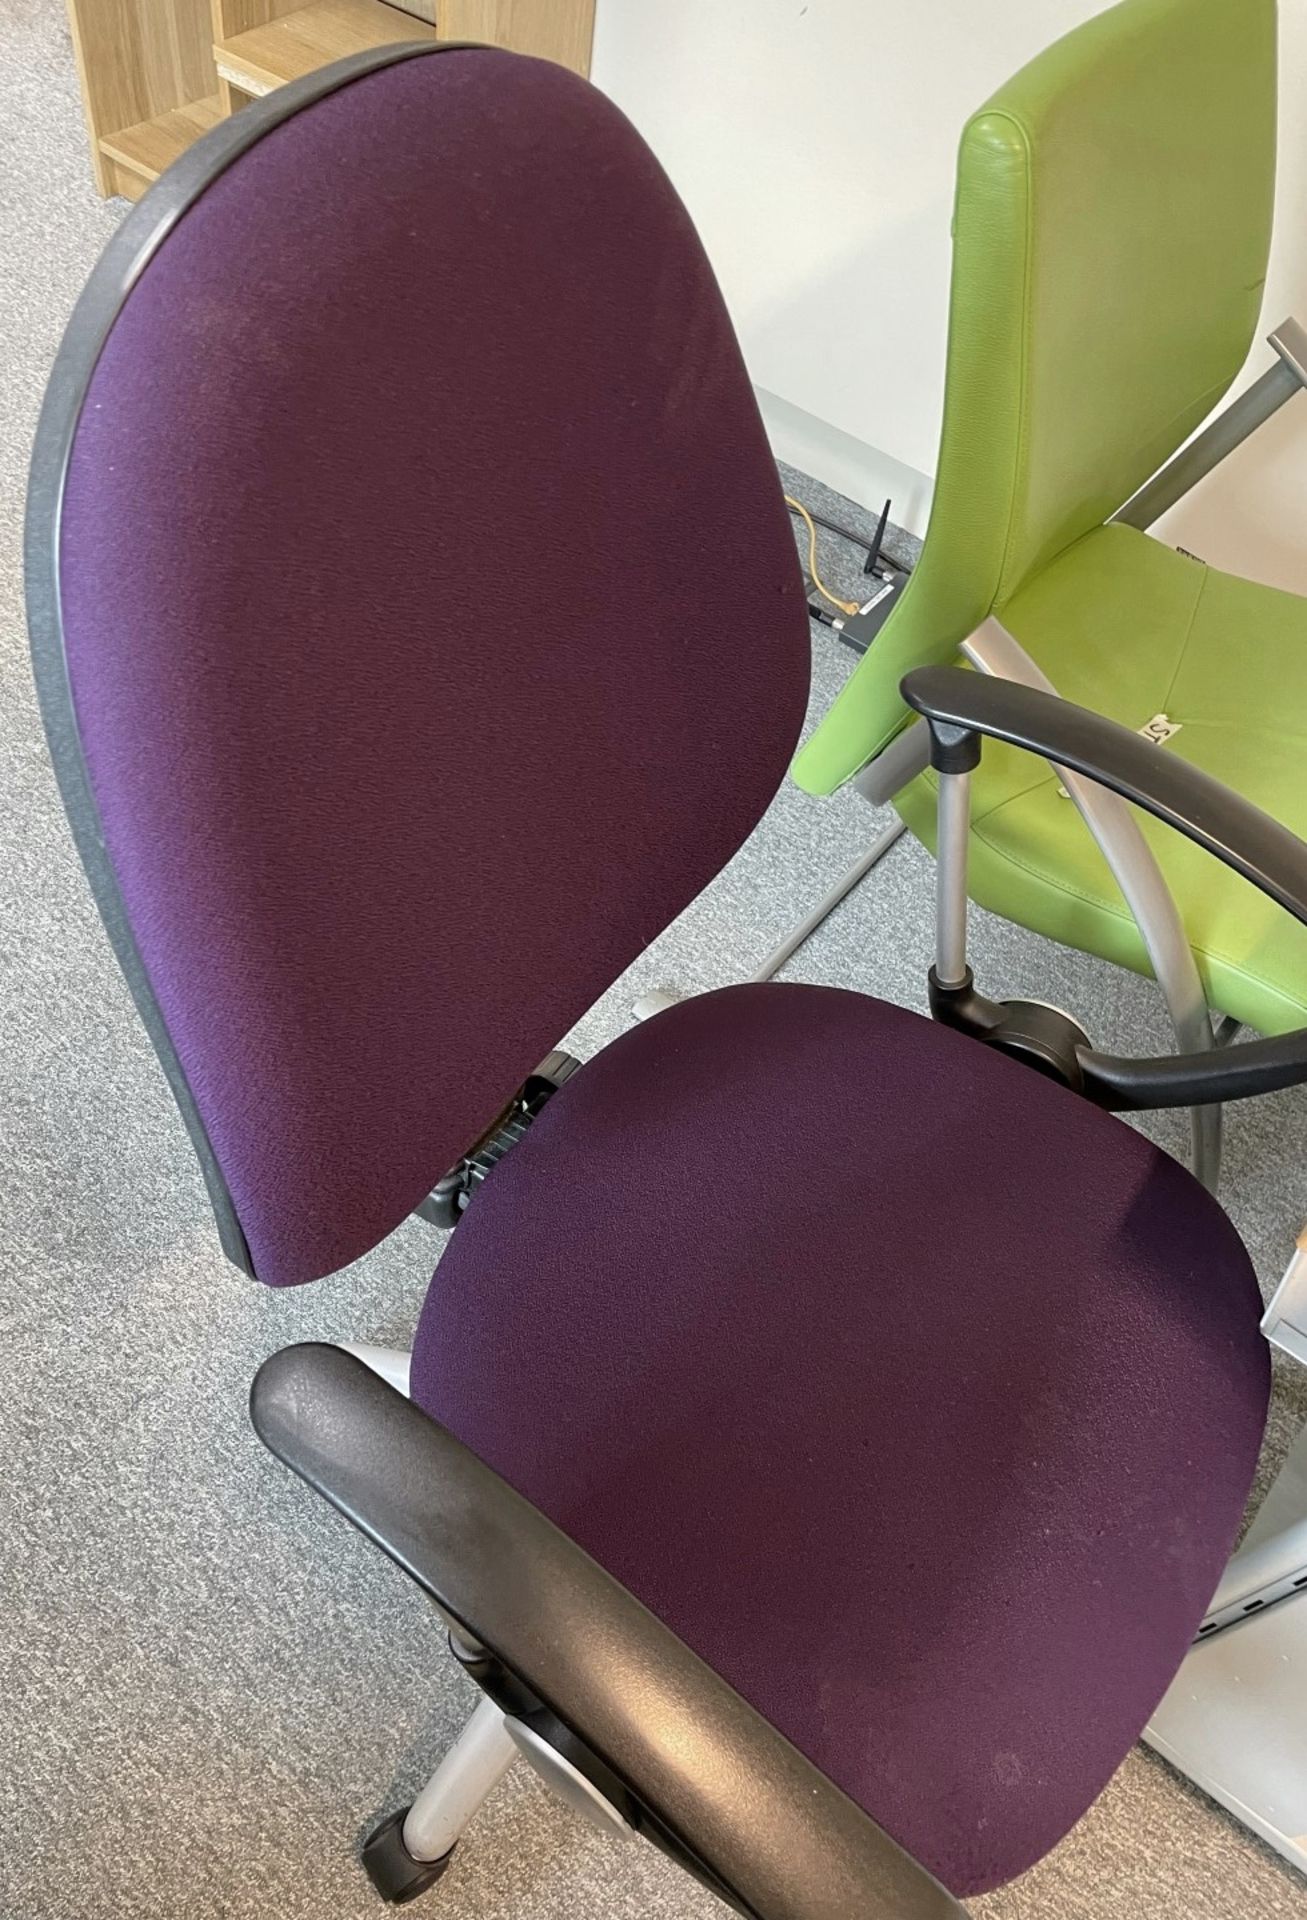 4 x TORASEN 'Mercury' Office Purple Swivel Chairs (M60A) - From An Executive Office Environment - - Image 4 of 6